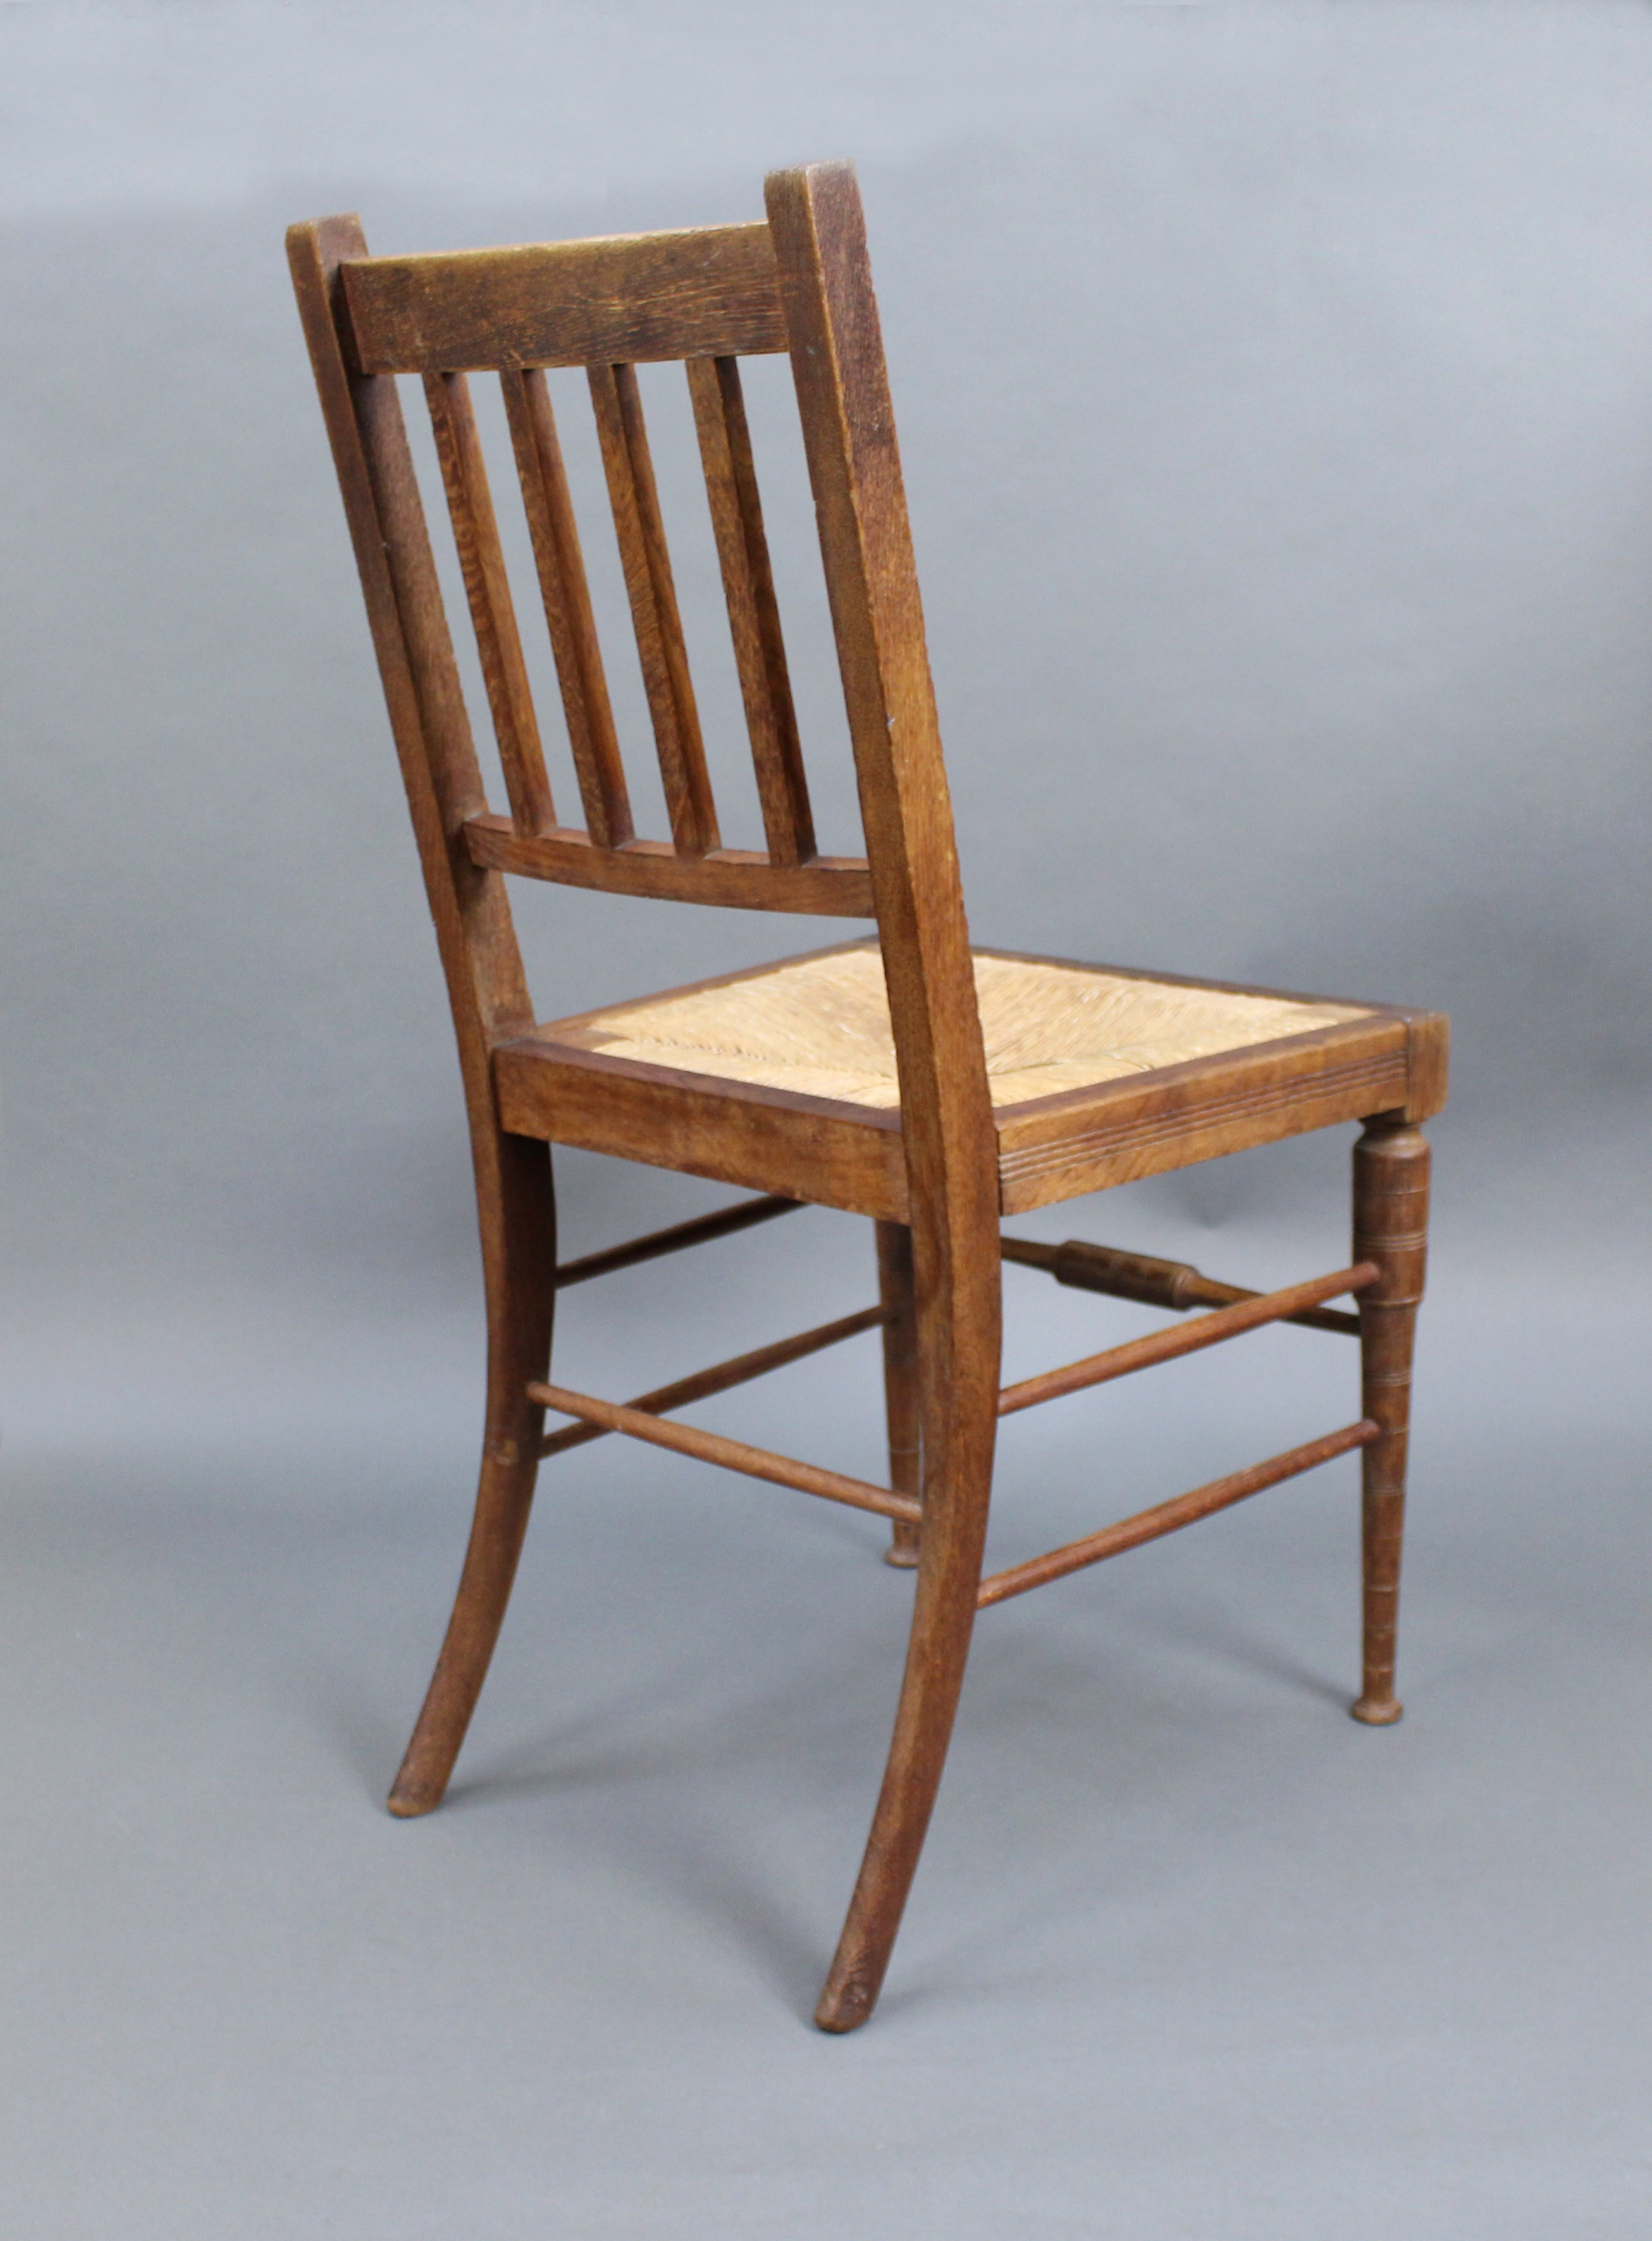 Edwardian Beech Occasional Chair with Rush Seat - Image 2 of 2